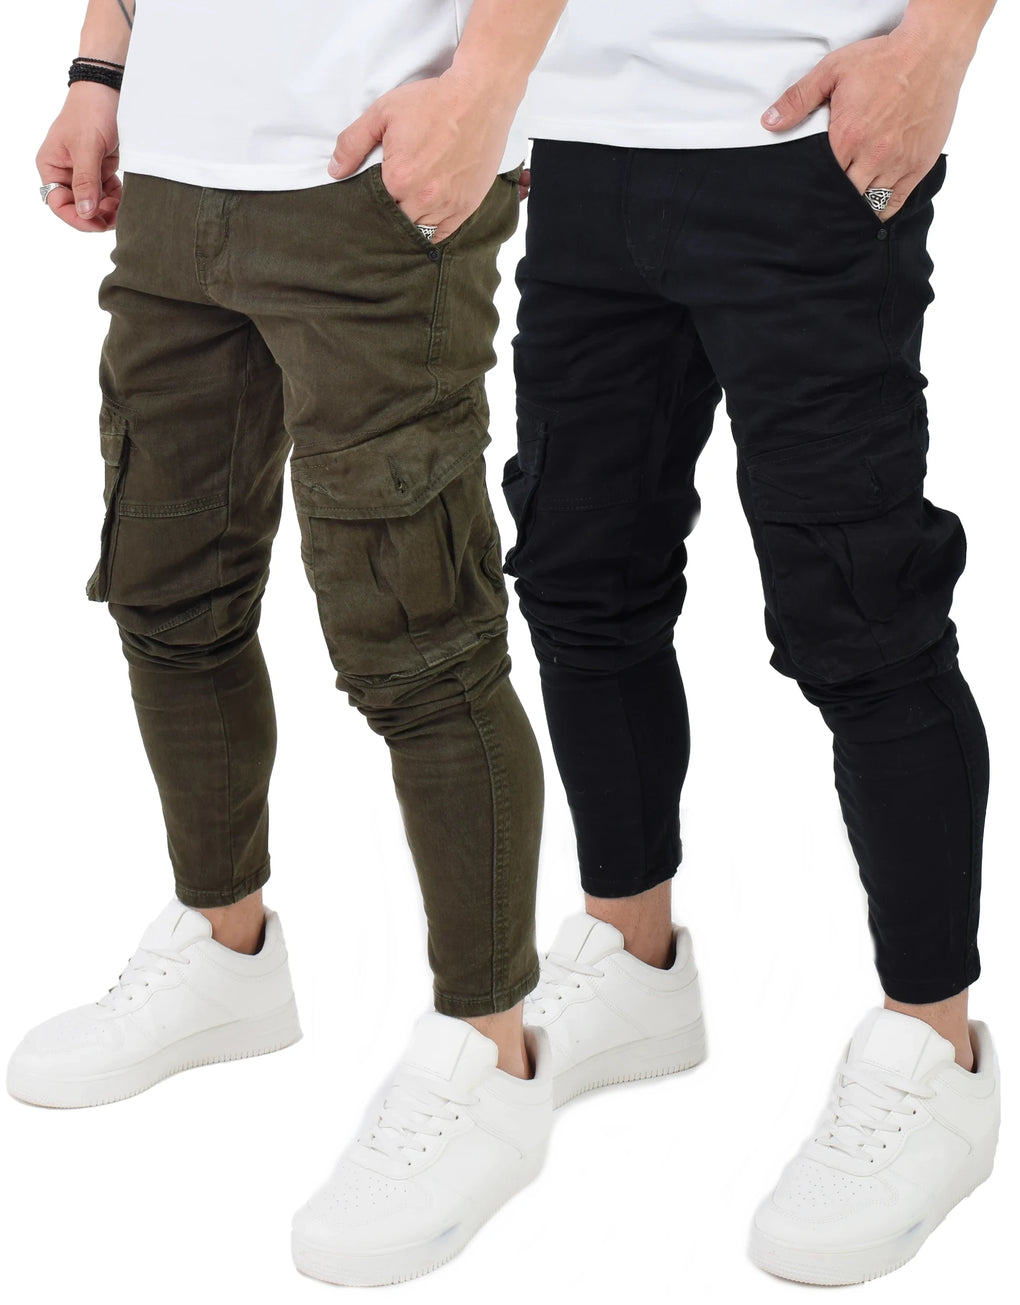 2PACK Cargo Pants